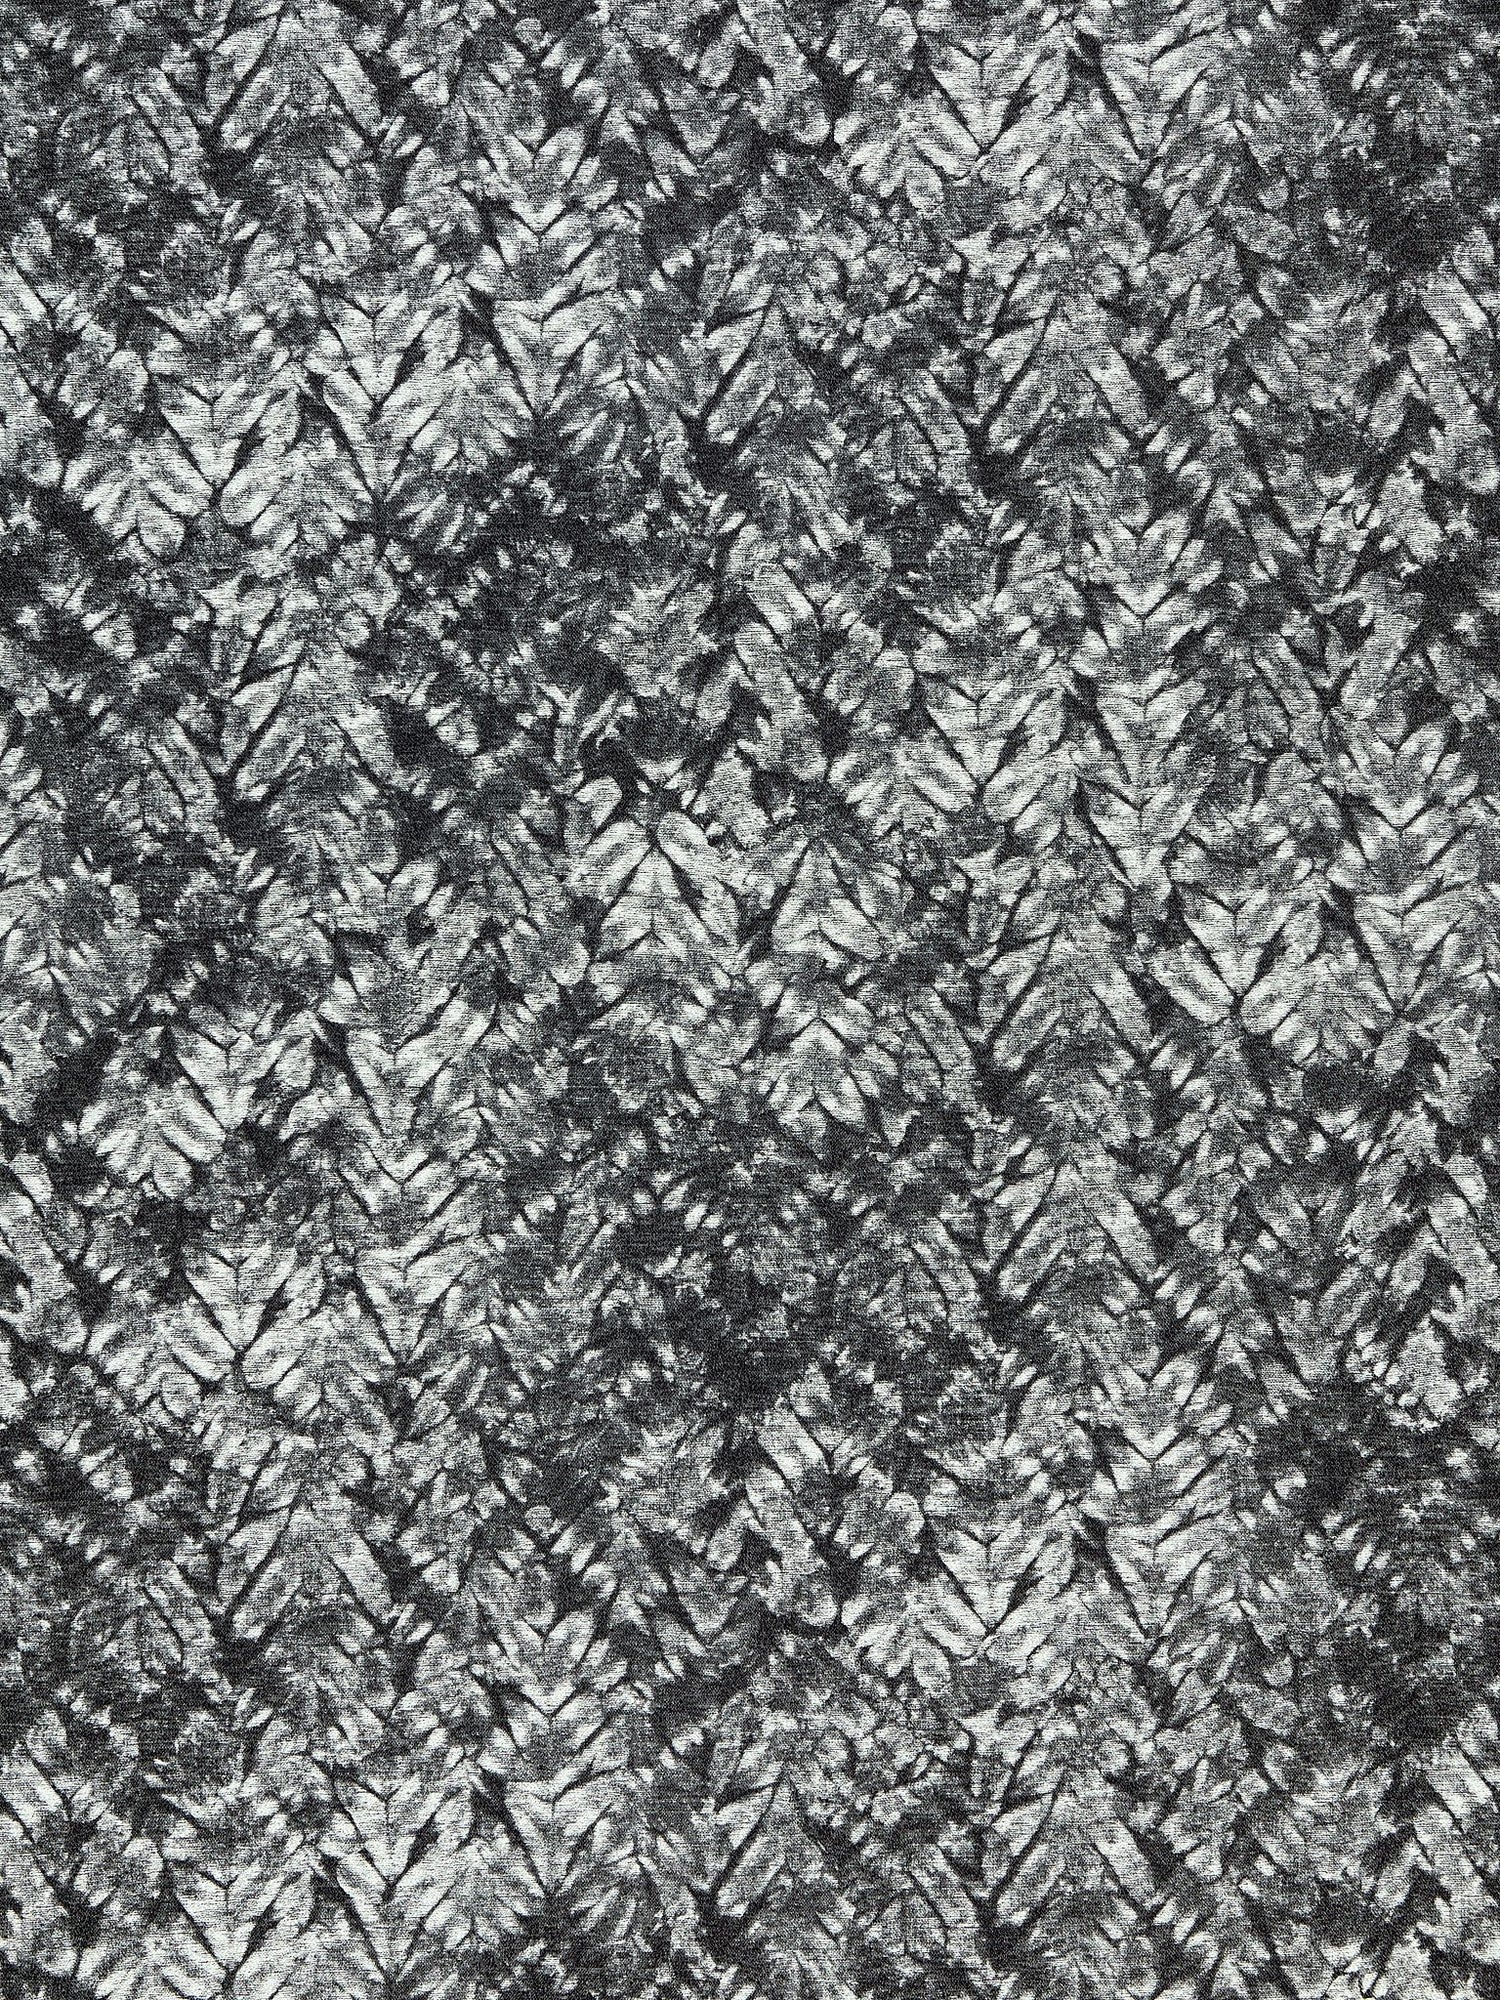 Fiji Weave fabric in carbon color - pattern number SC 000327199 - by Scalamandre in the Scalamandre Fabrics Book 1 collection